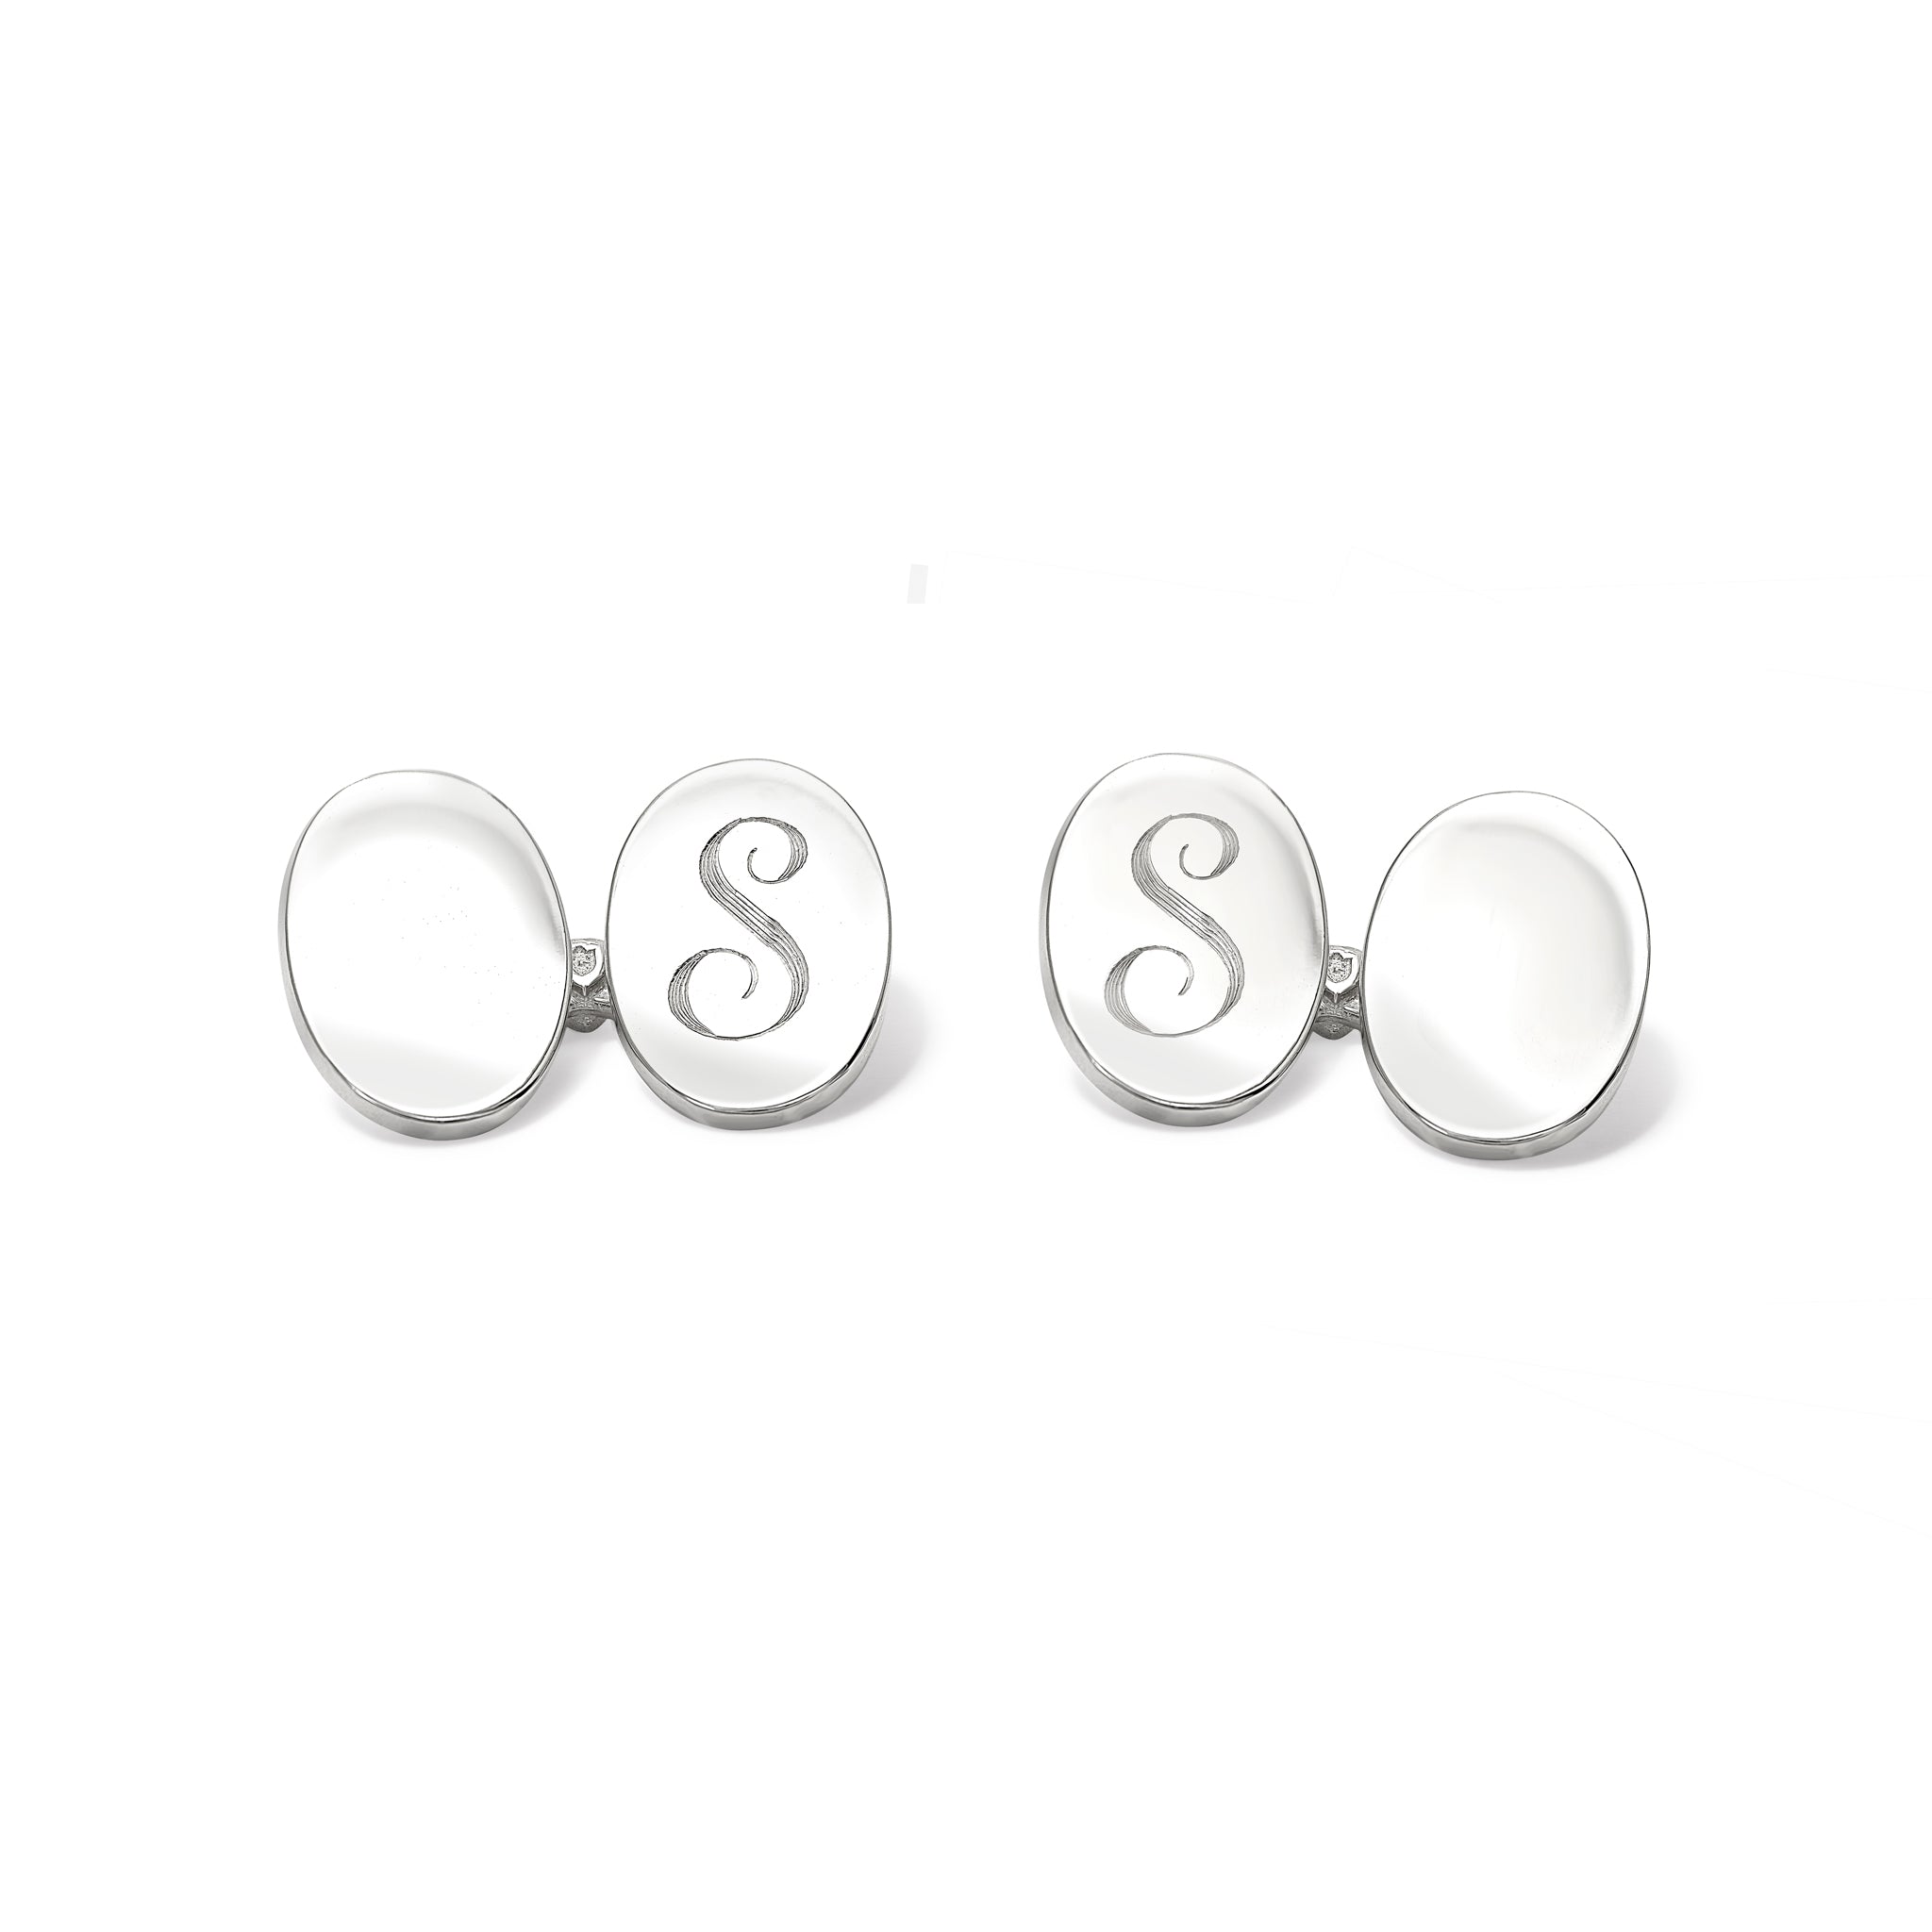 Oval Double Ended Cufflinks Silver